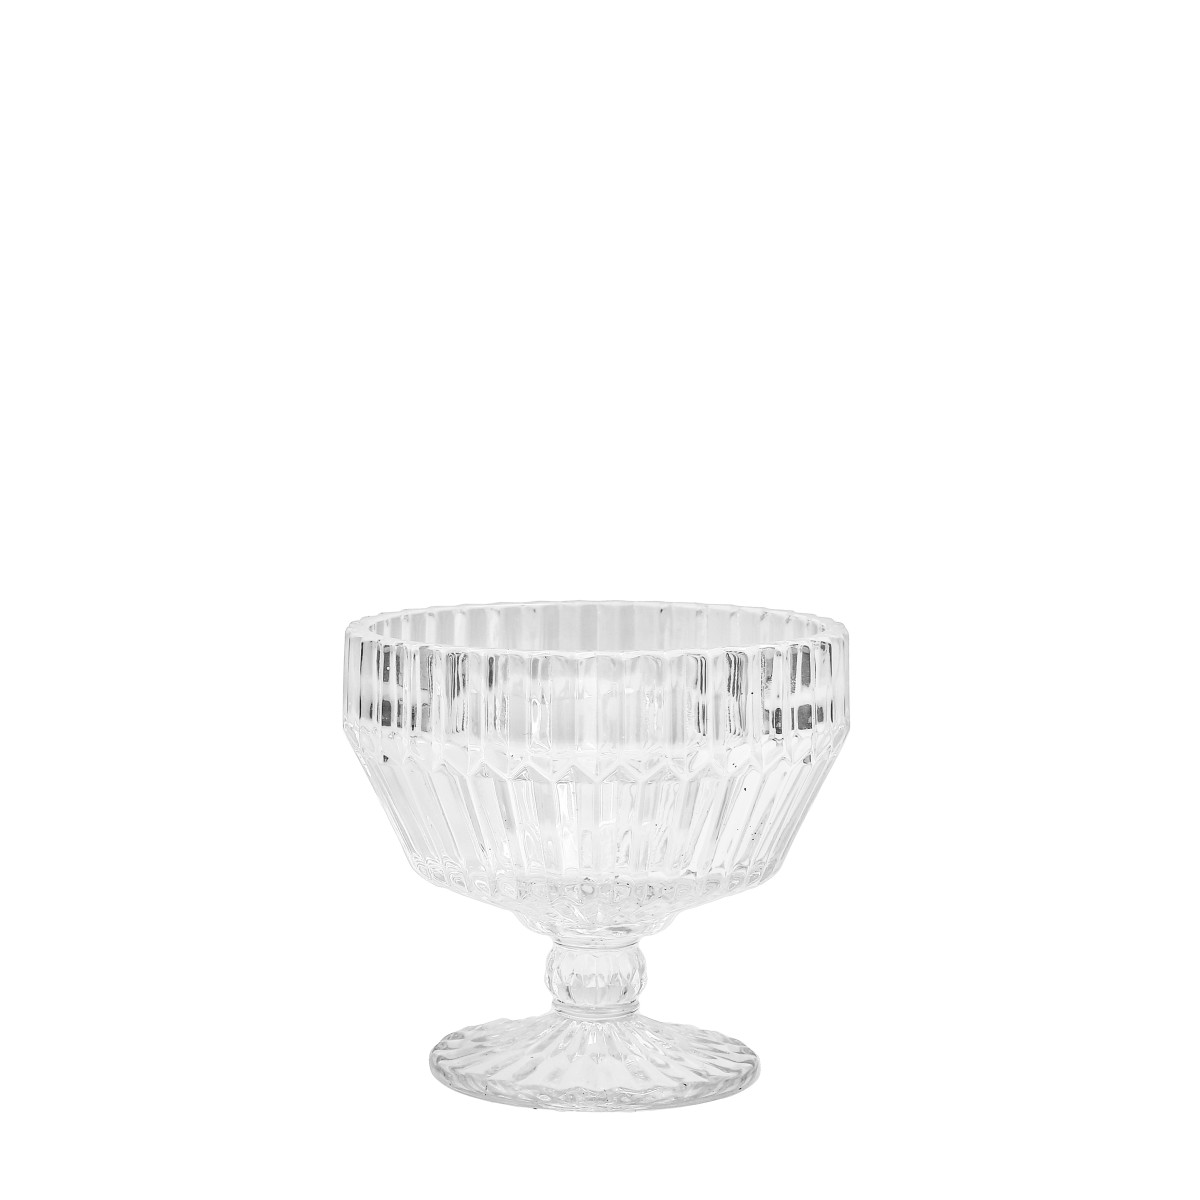 Archie Footed Dessert Bowl, Clear, Set of 6